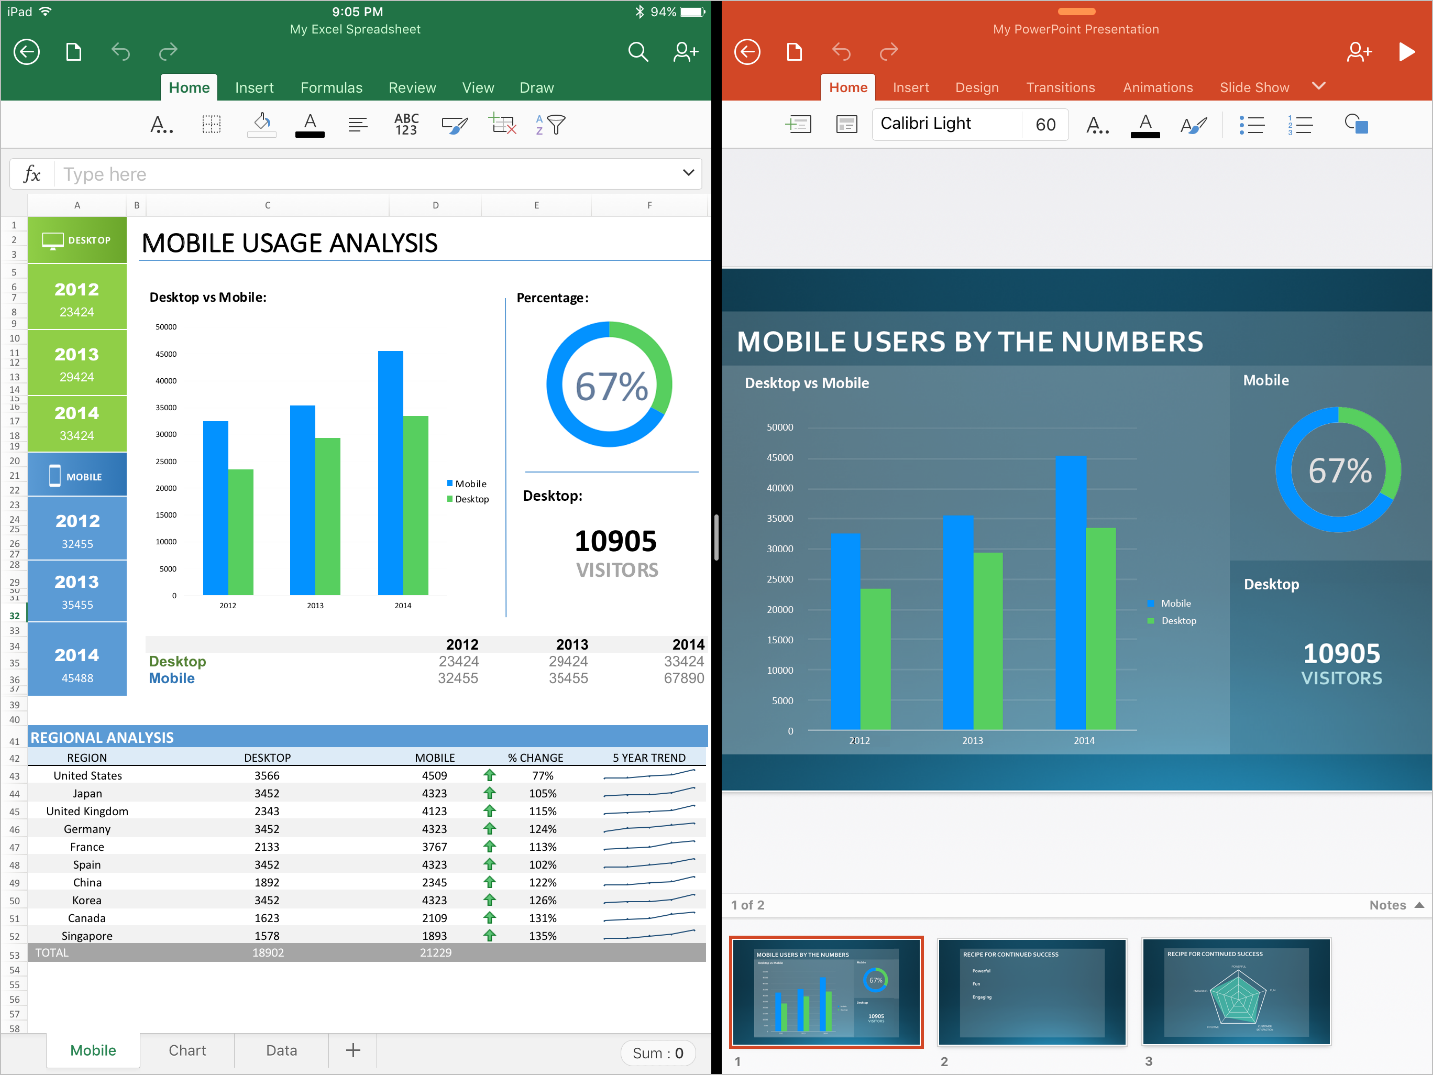 Microsoft Office Apps Are Ready For The Ipad Pro Microsoft 365 Blog